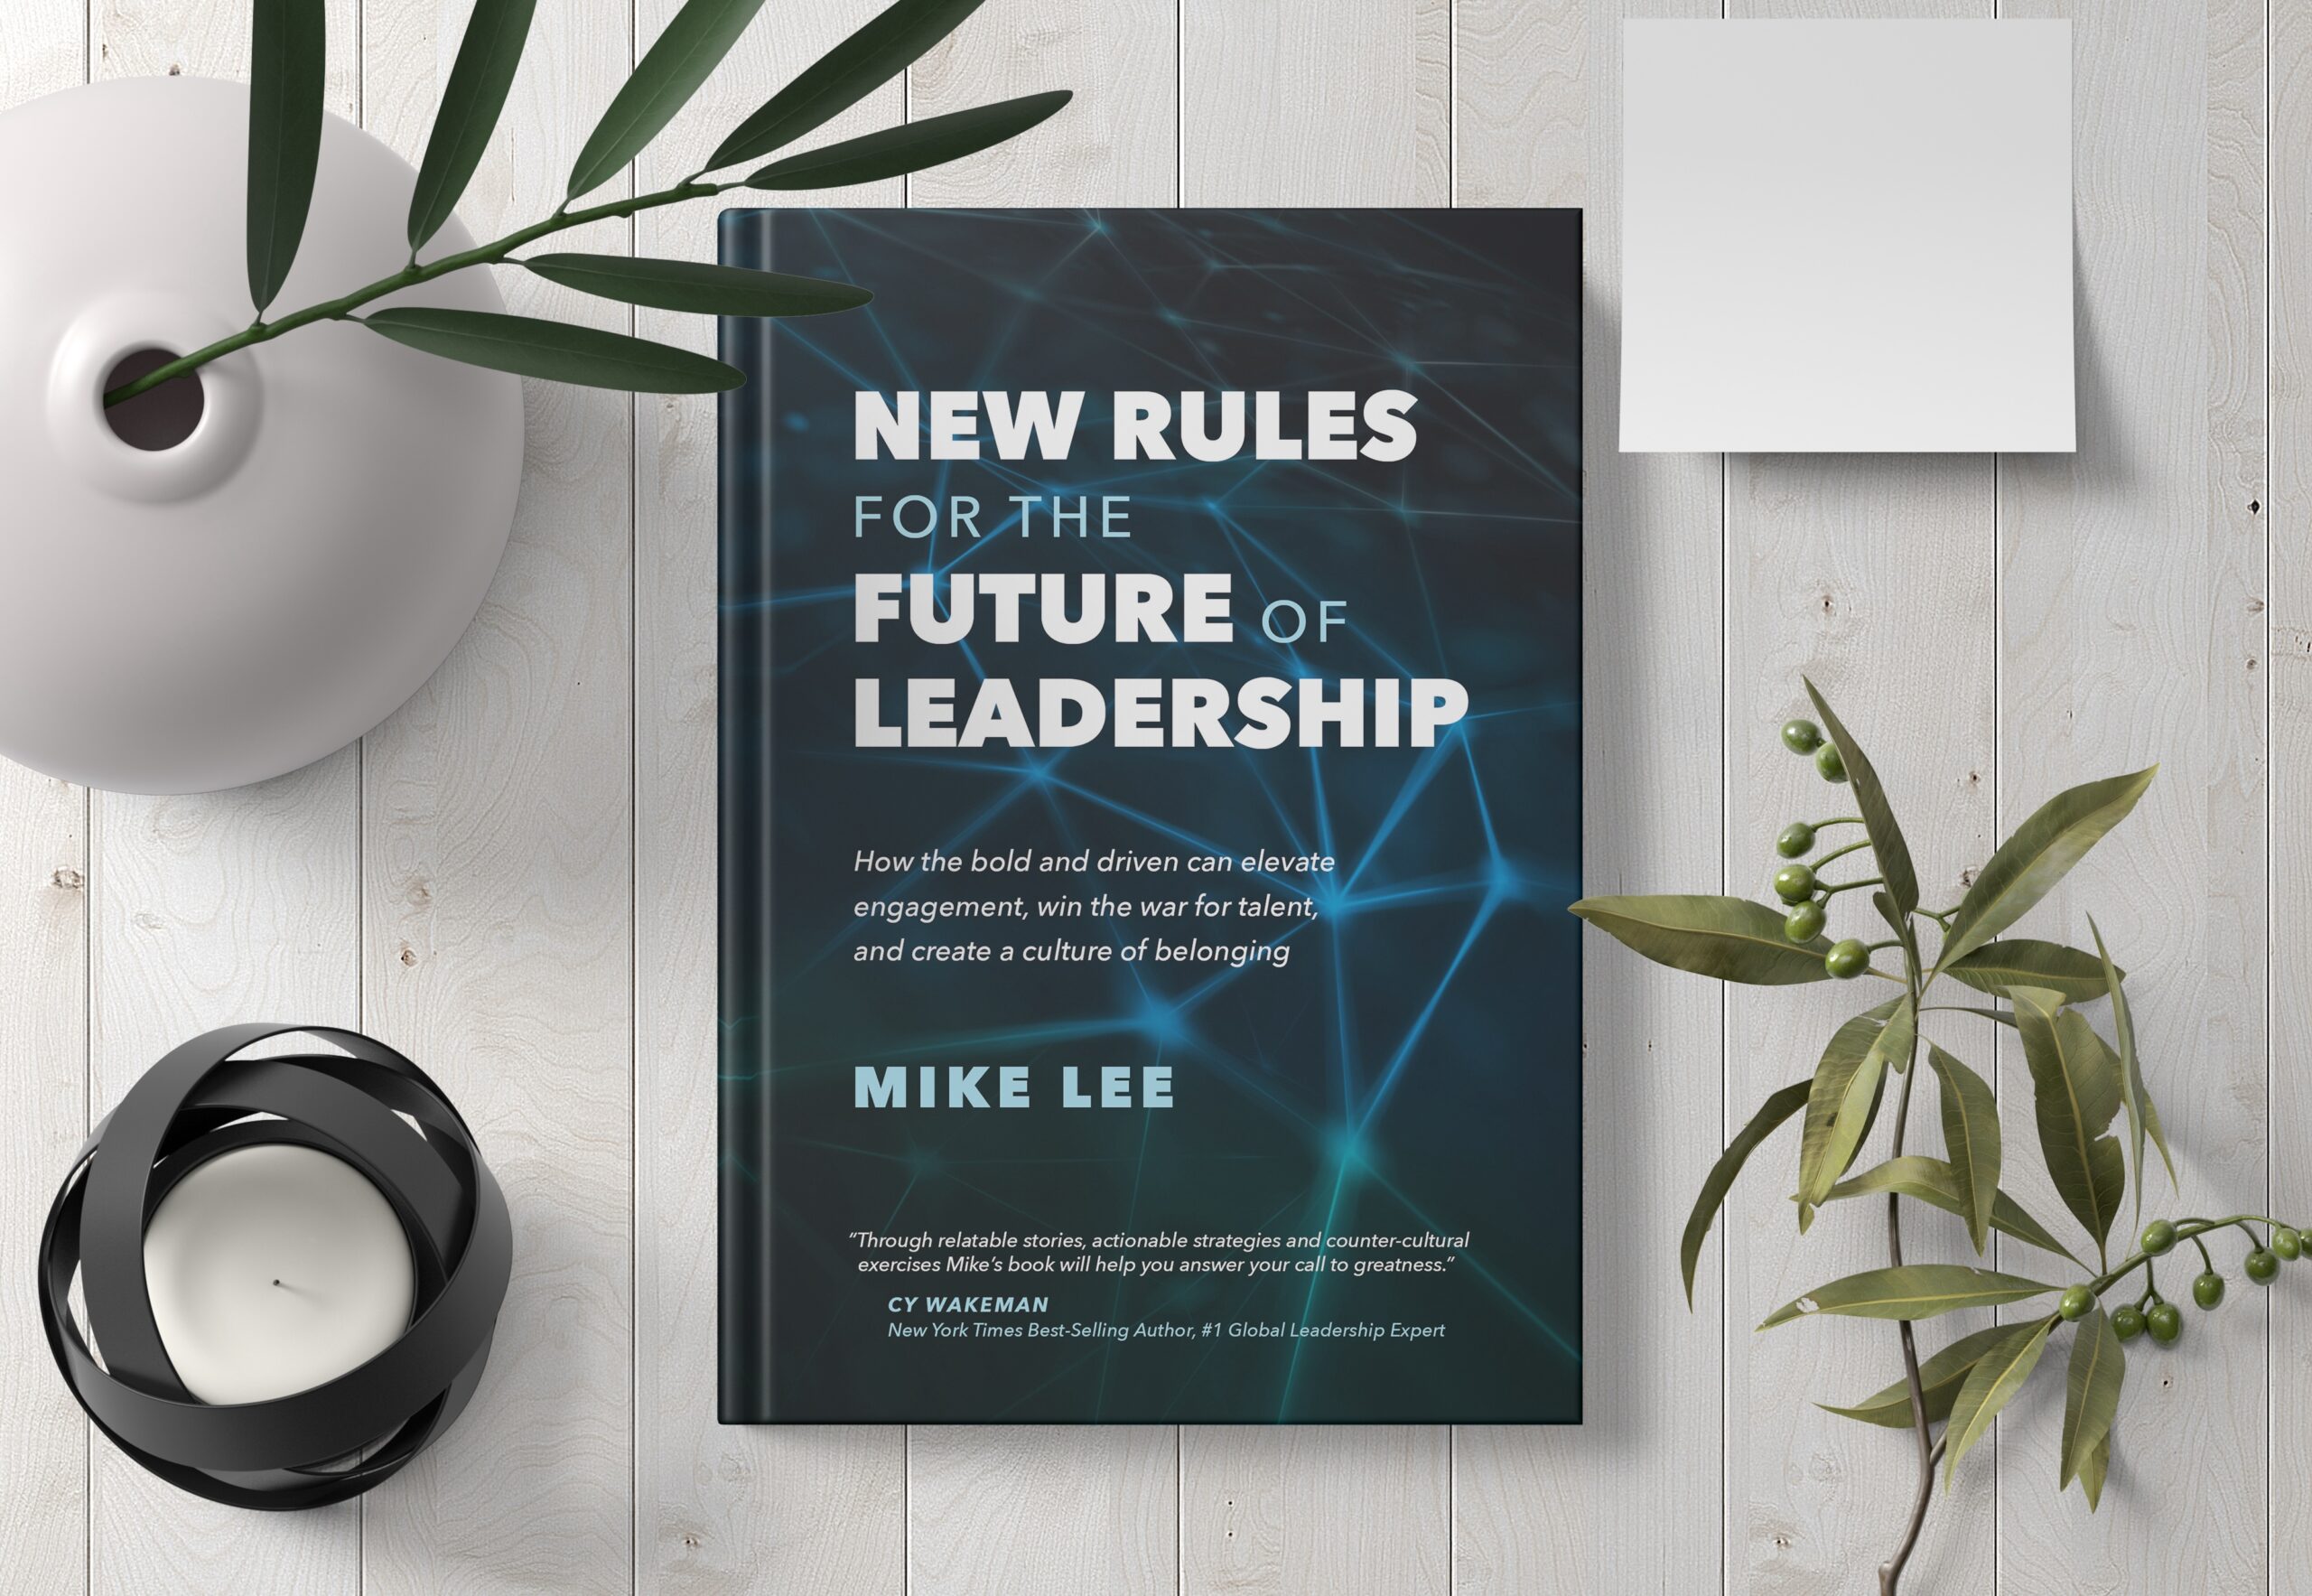 A New Era Of Business. A New Set Of Leadership Rules.